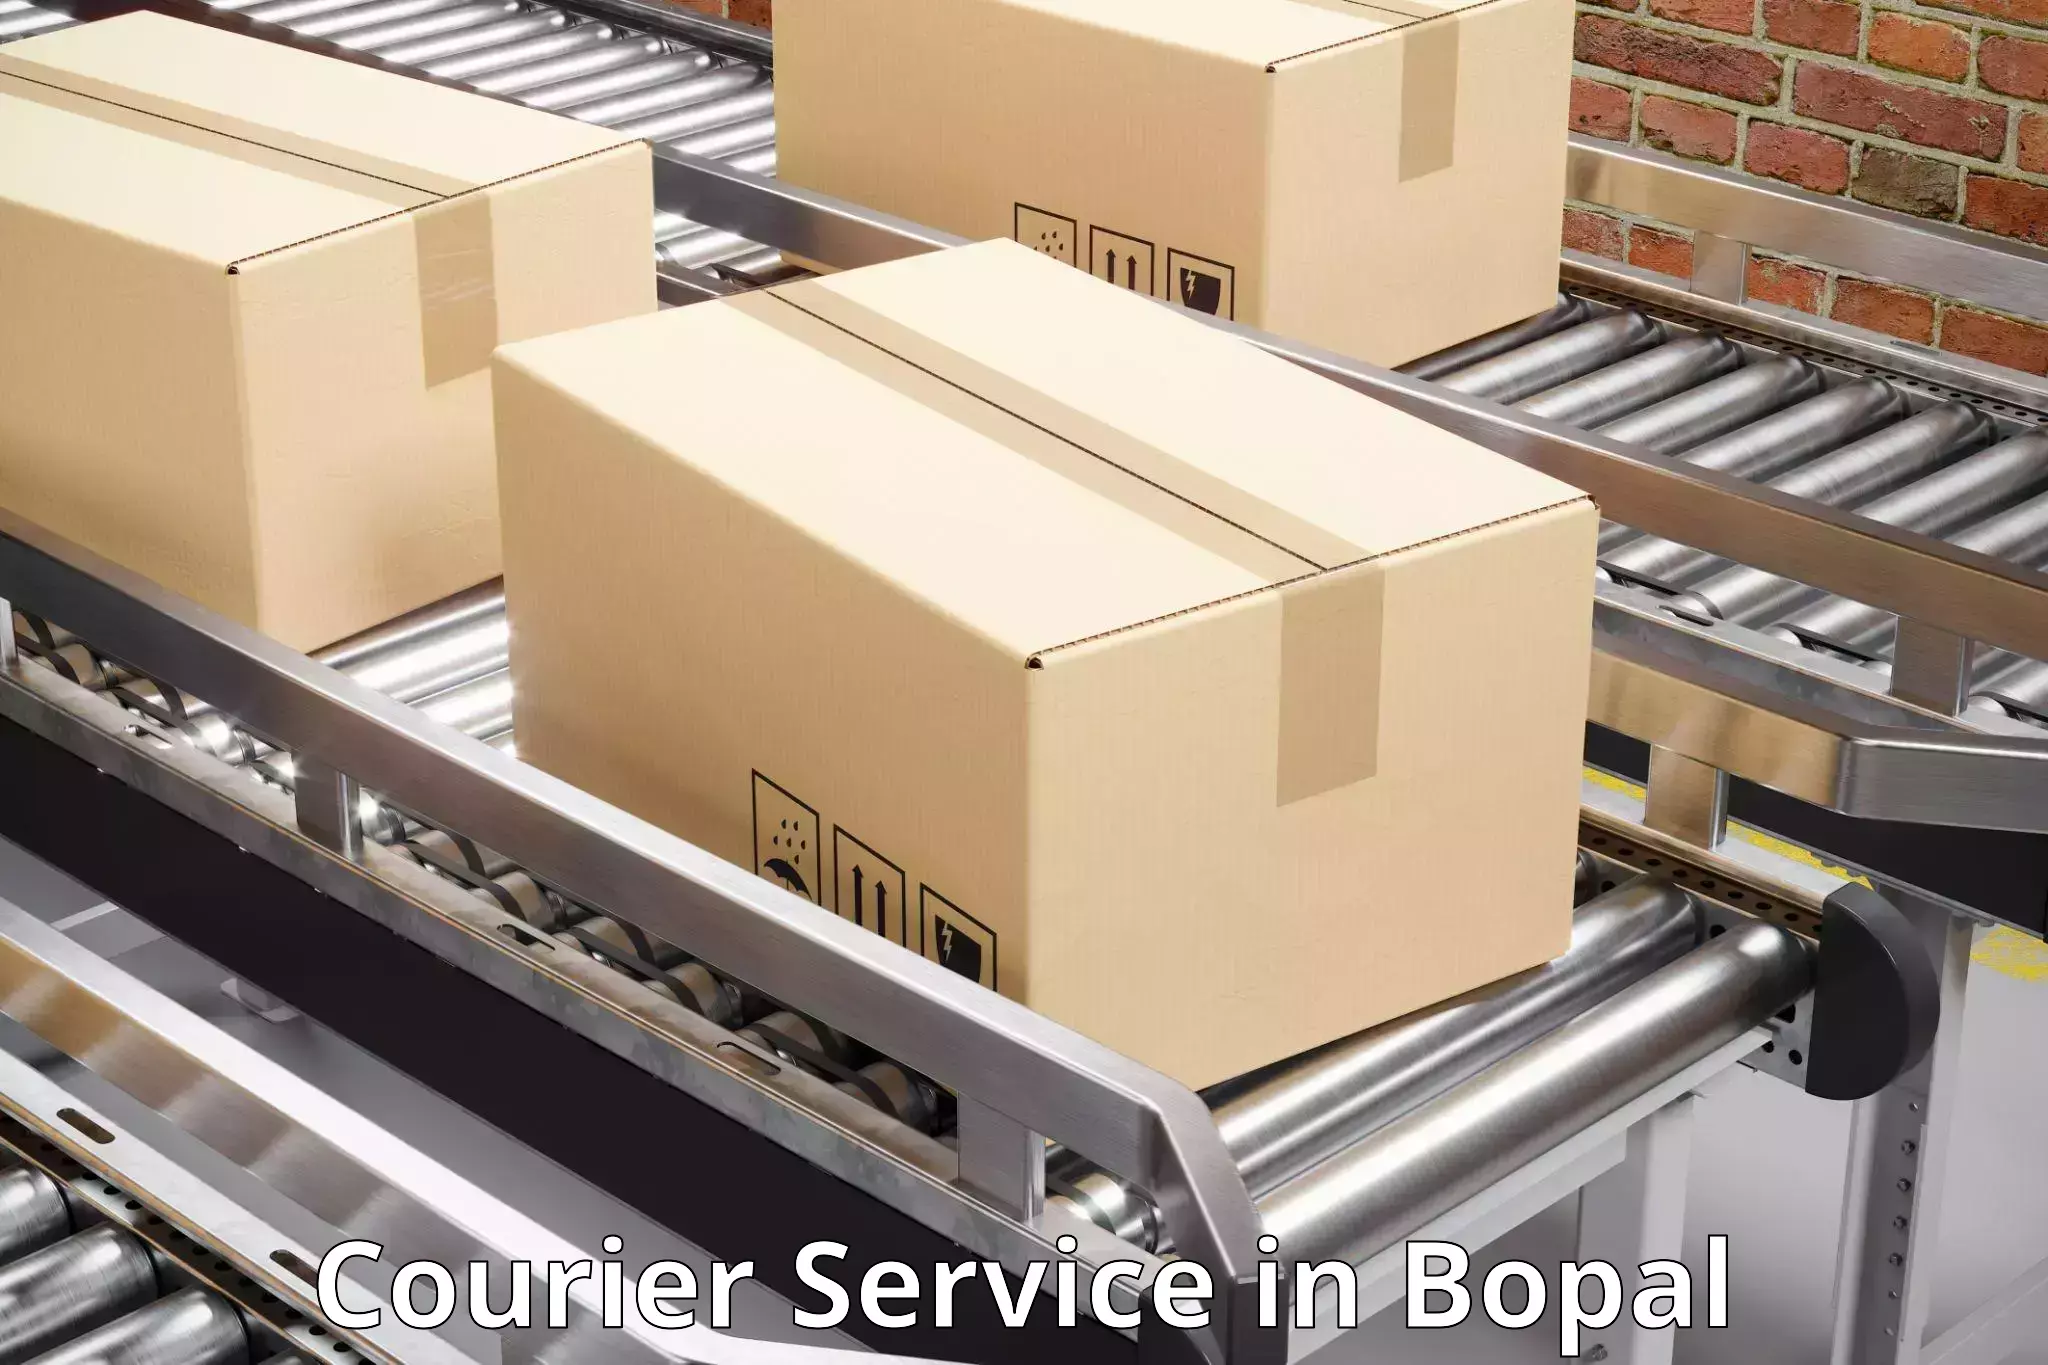 Courier service partnerships in Bopal